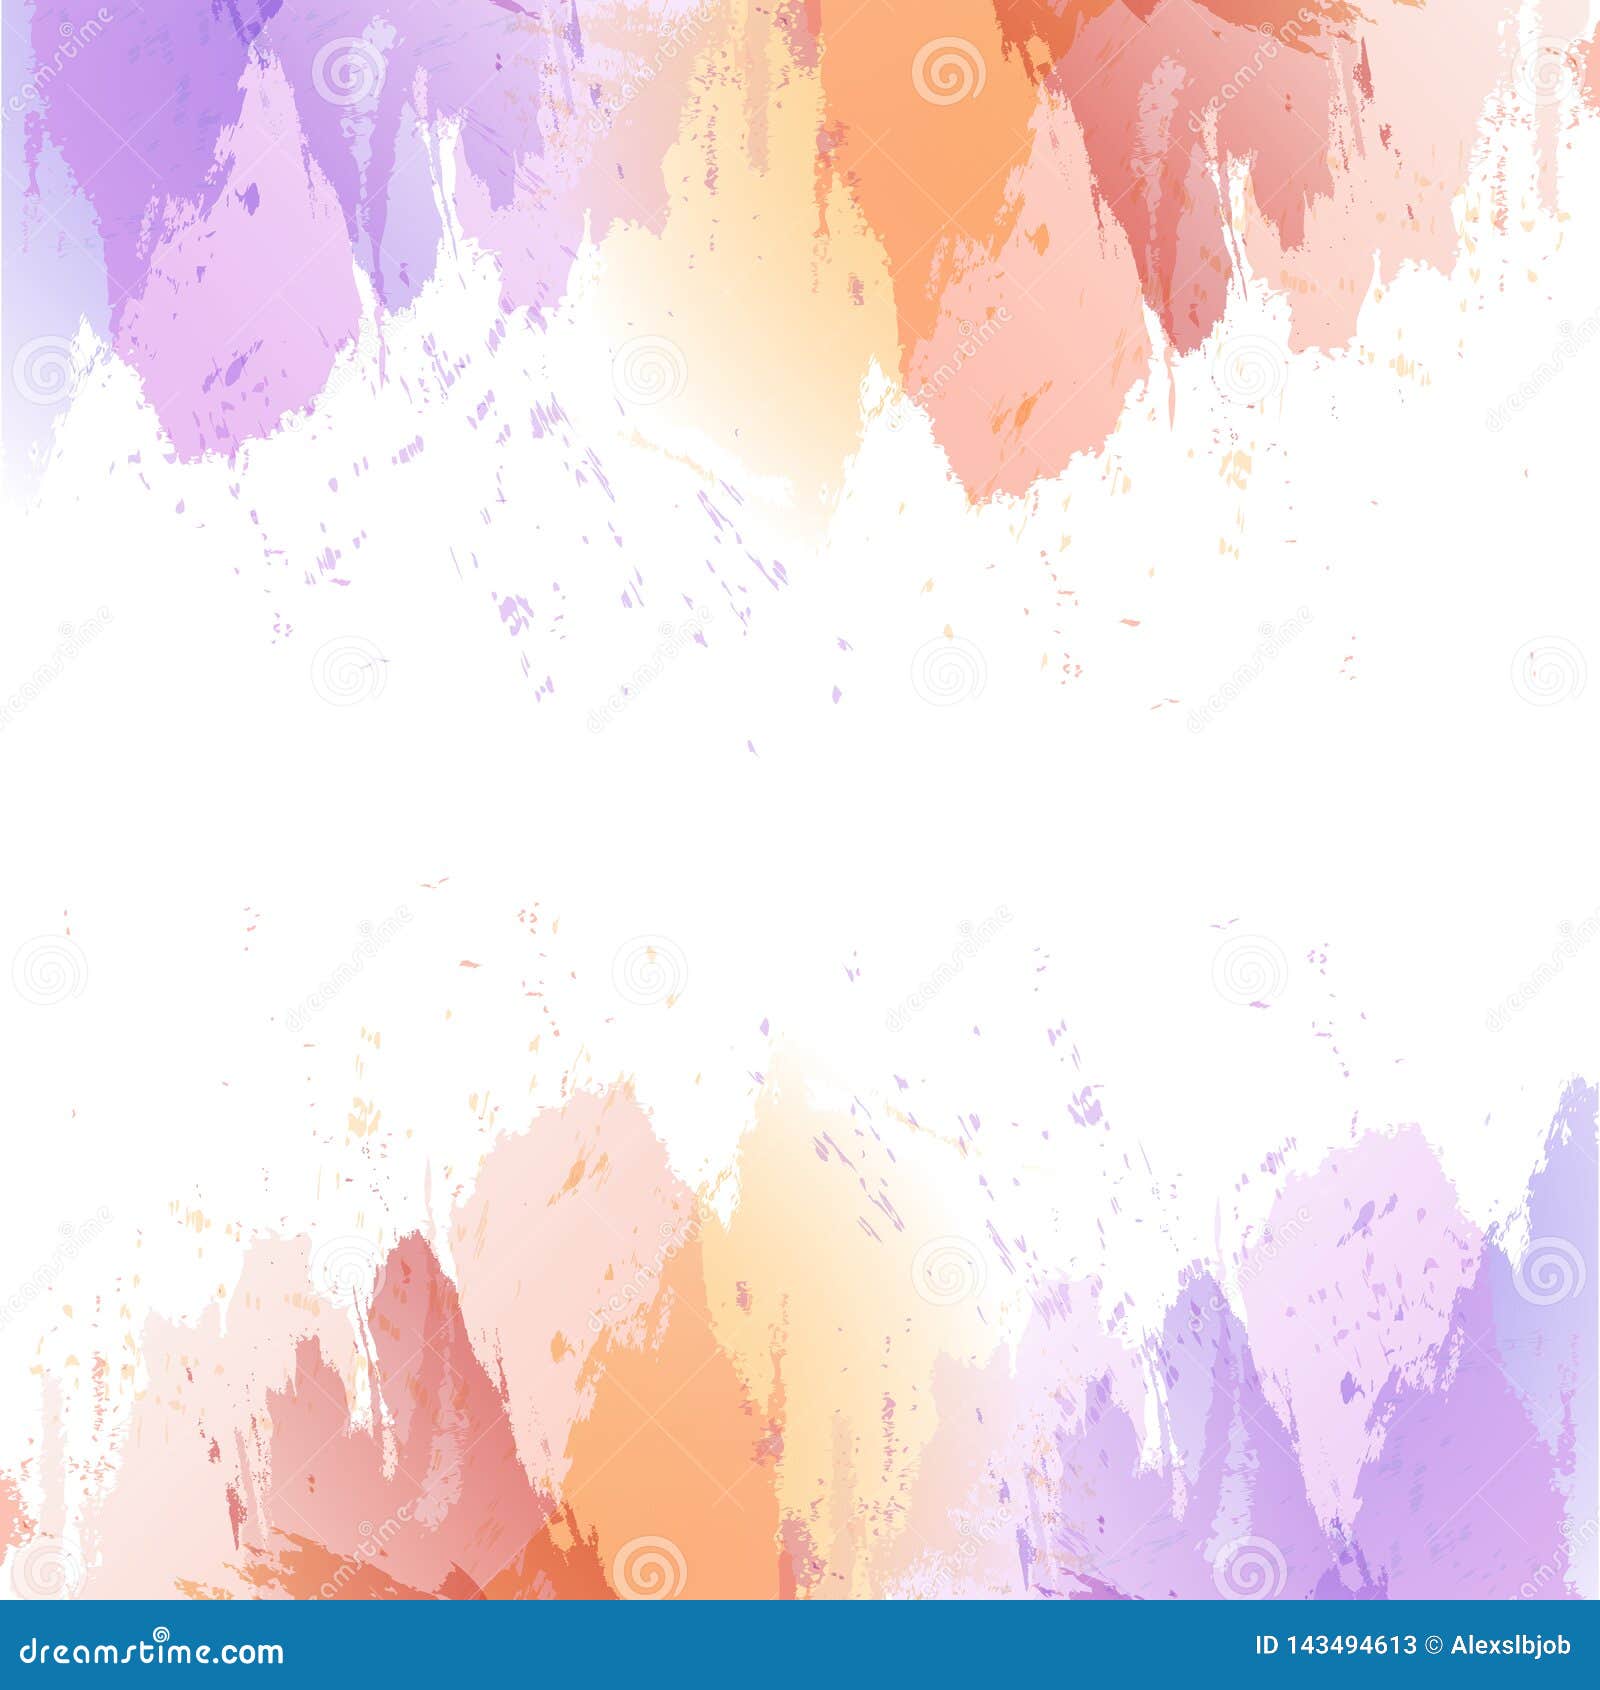 Download Vector Watercolor Splash Texture Background Isolated. Hand-drawn Blob, Spot. Watercolor Effects ...